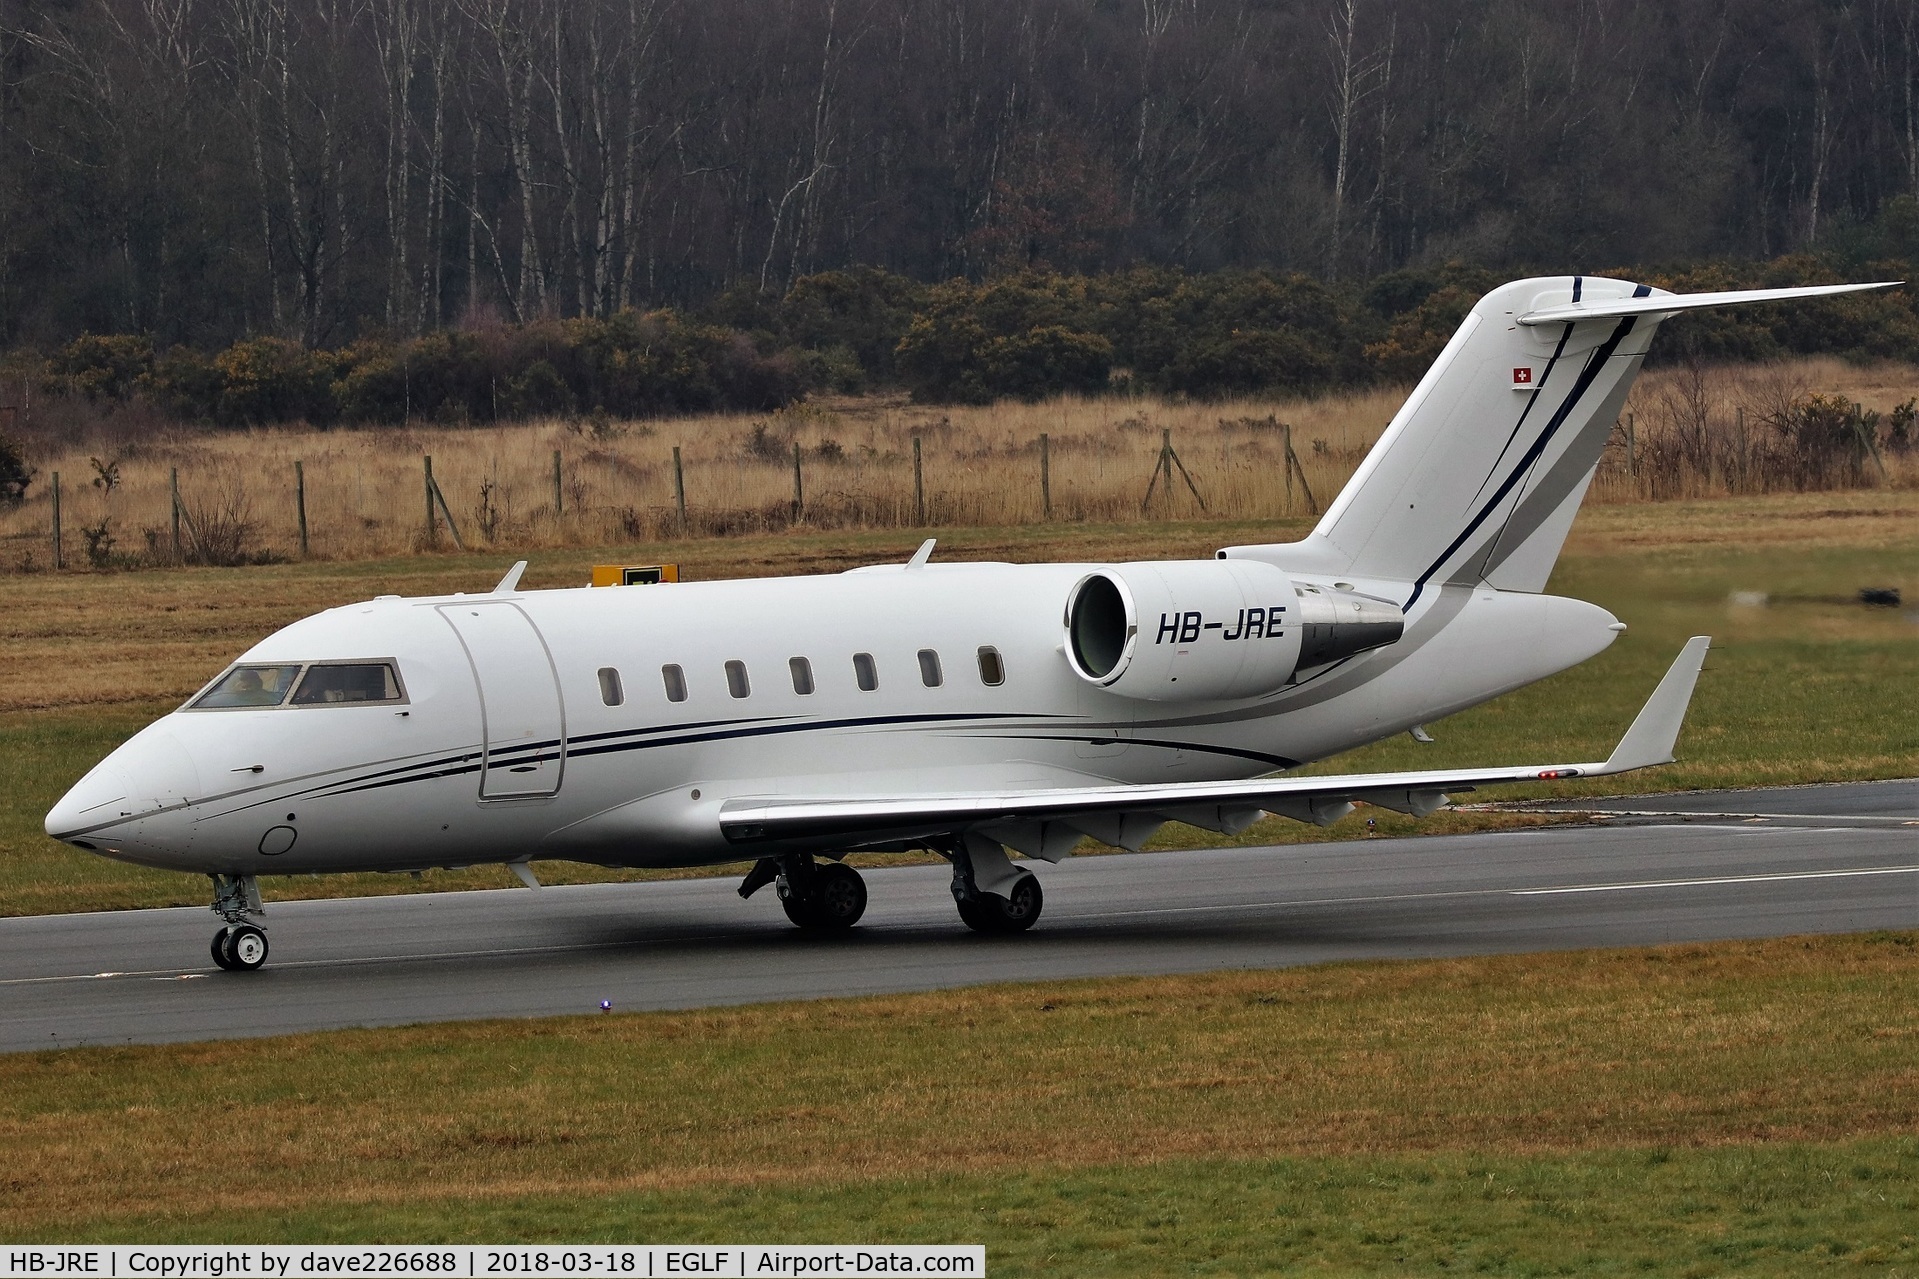 HB-JRE, 2007 Bombardier Challenger 605 (CL-600-2B16) C/N 5726, Execujet Challenger 605 back tracking on 06 at Farnborough